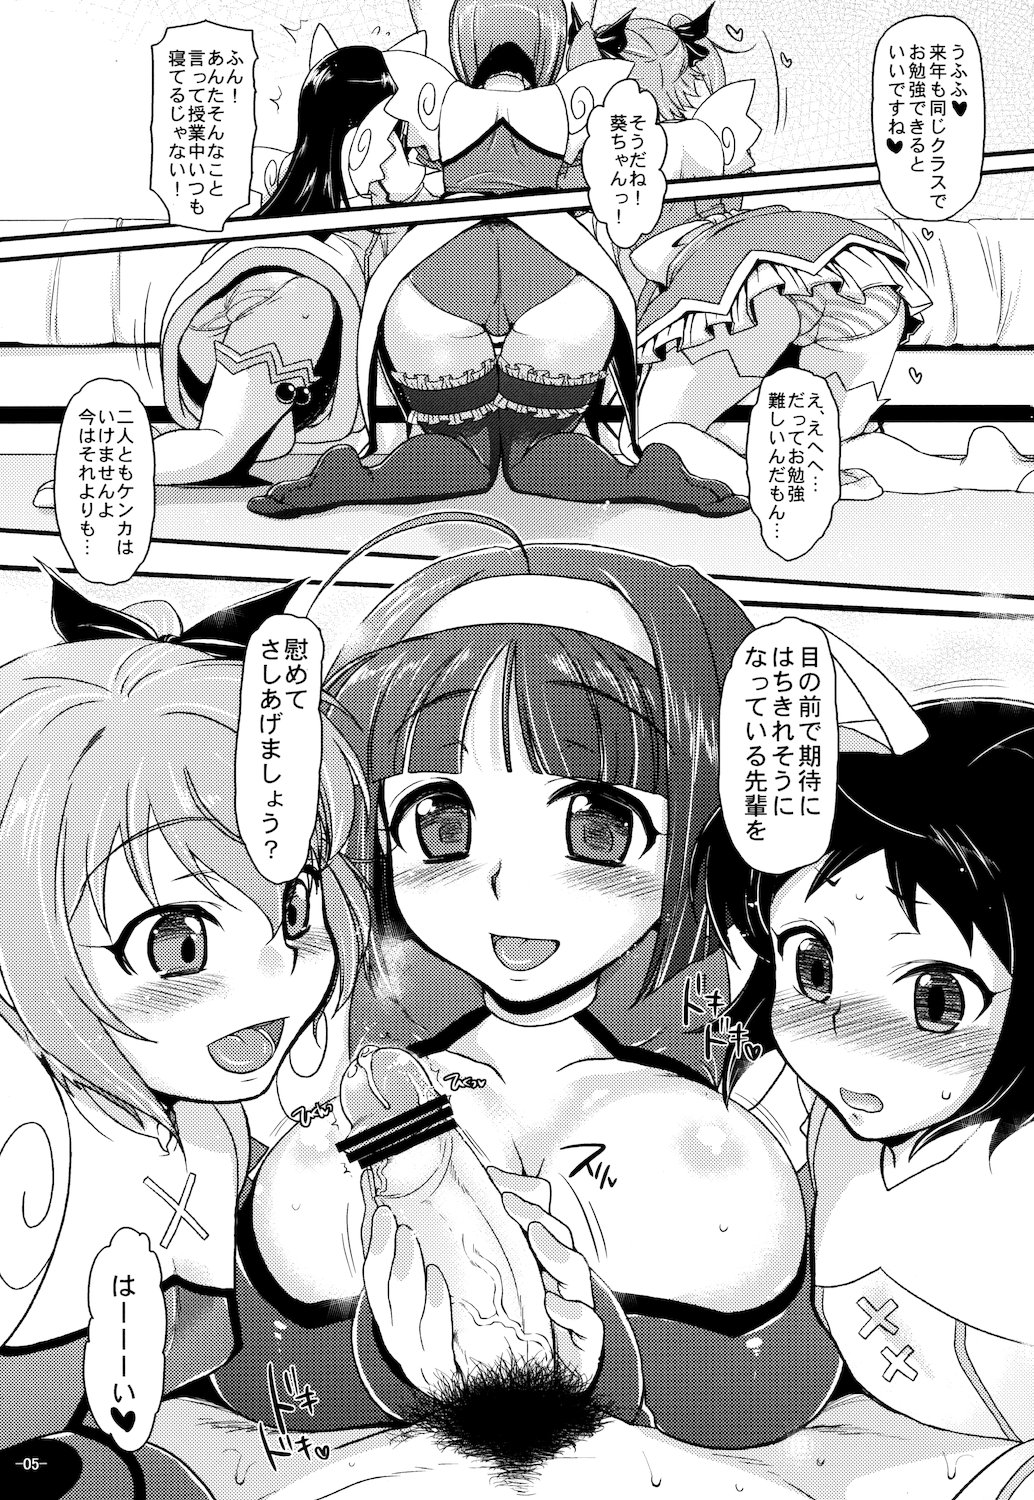 (Angel Time 6) [NIGHT FUCKERS (Mitsugi)] x3 Angels (Kaitou Tenshi Twin Angel) page 5 full